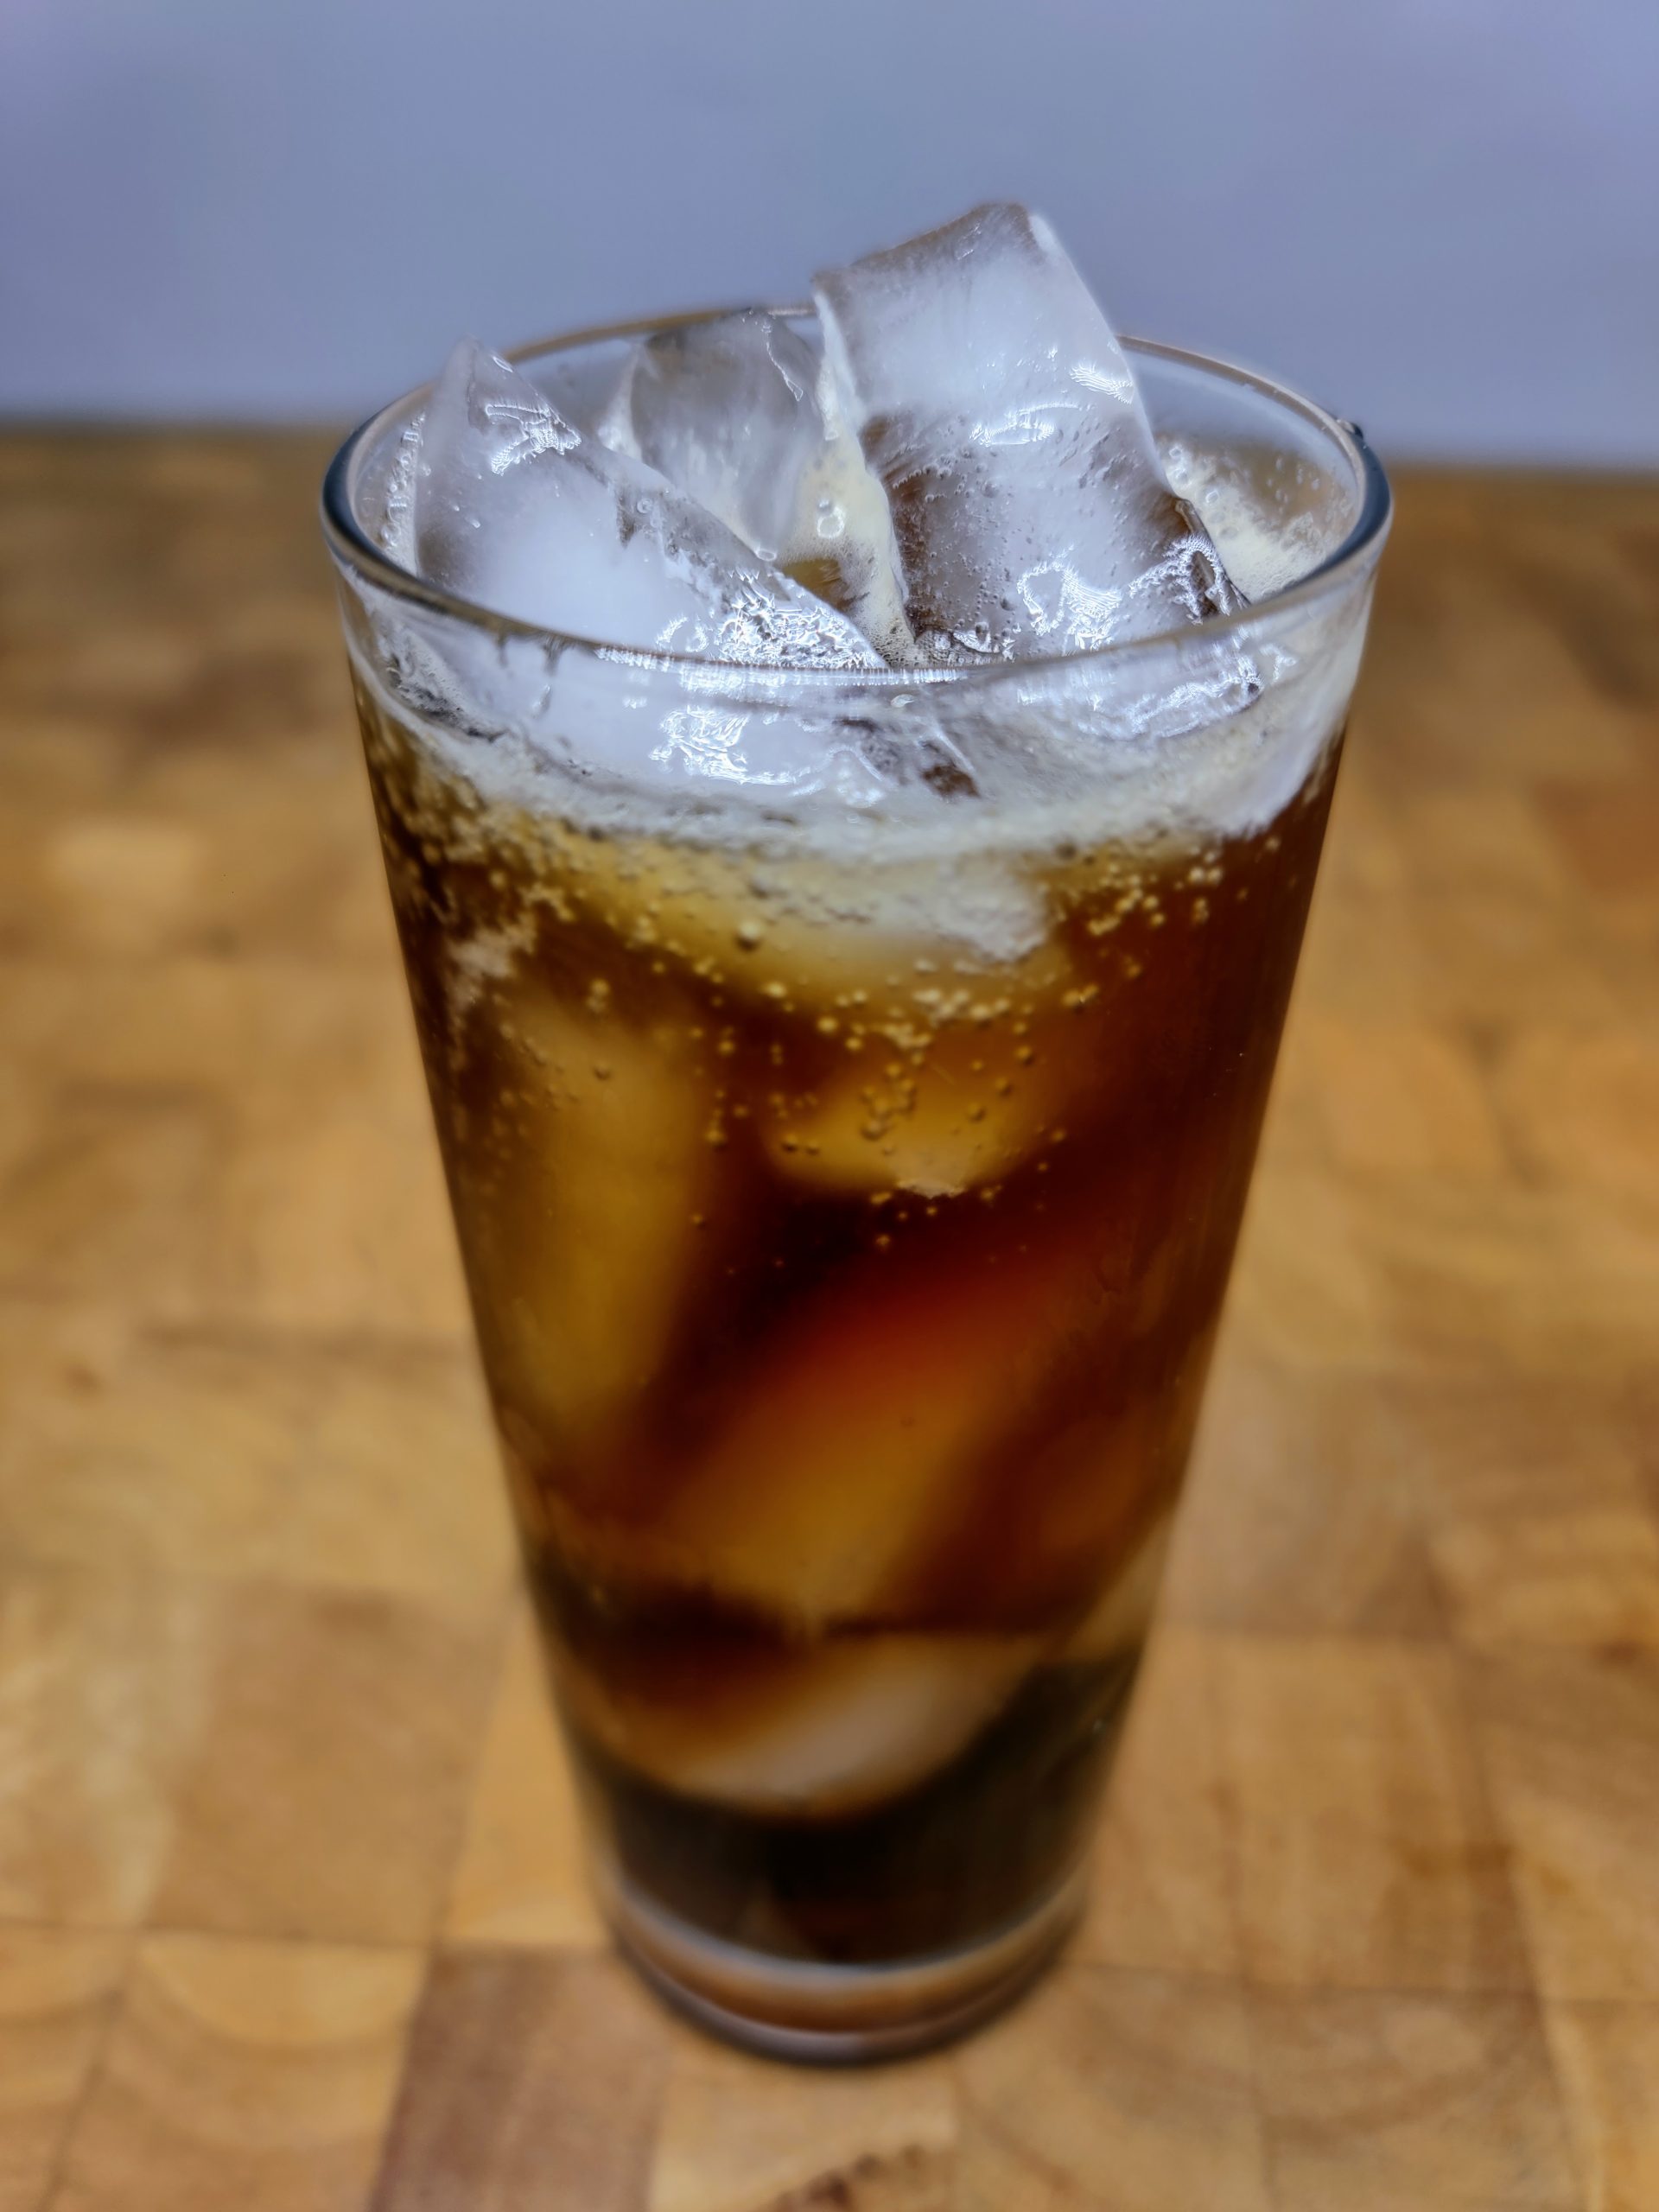 highball glass filled with jameson and coke on a wooden table